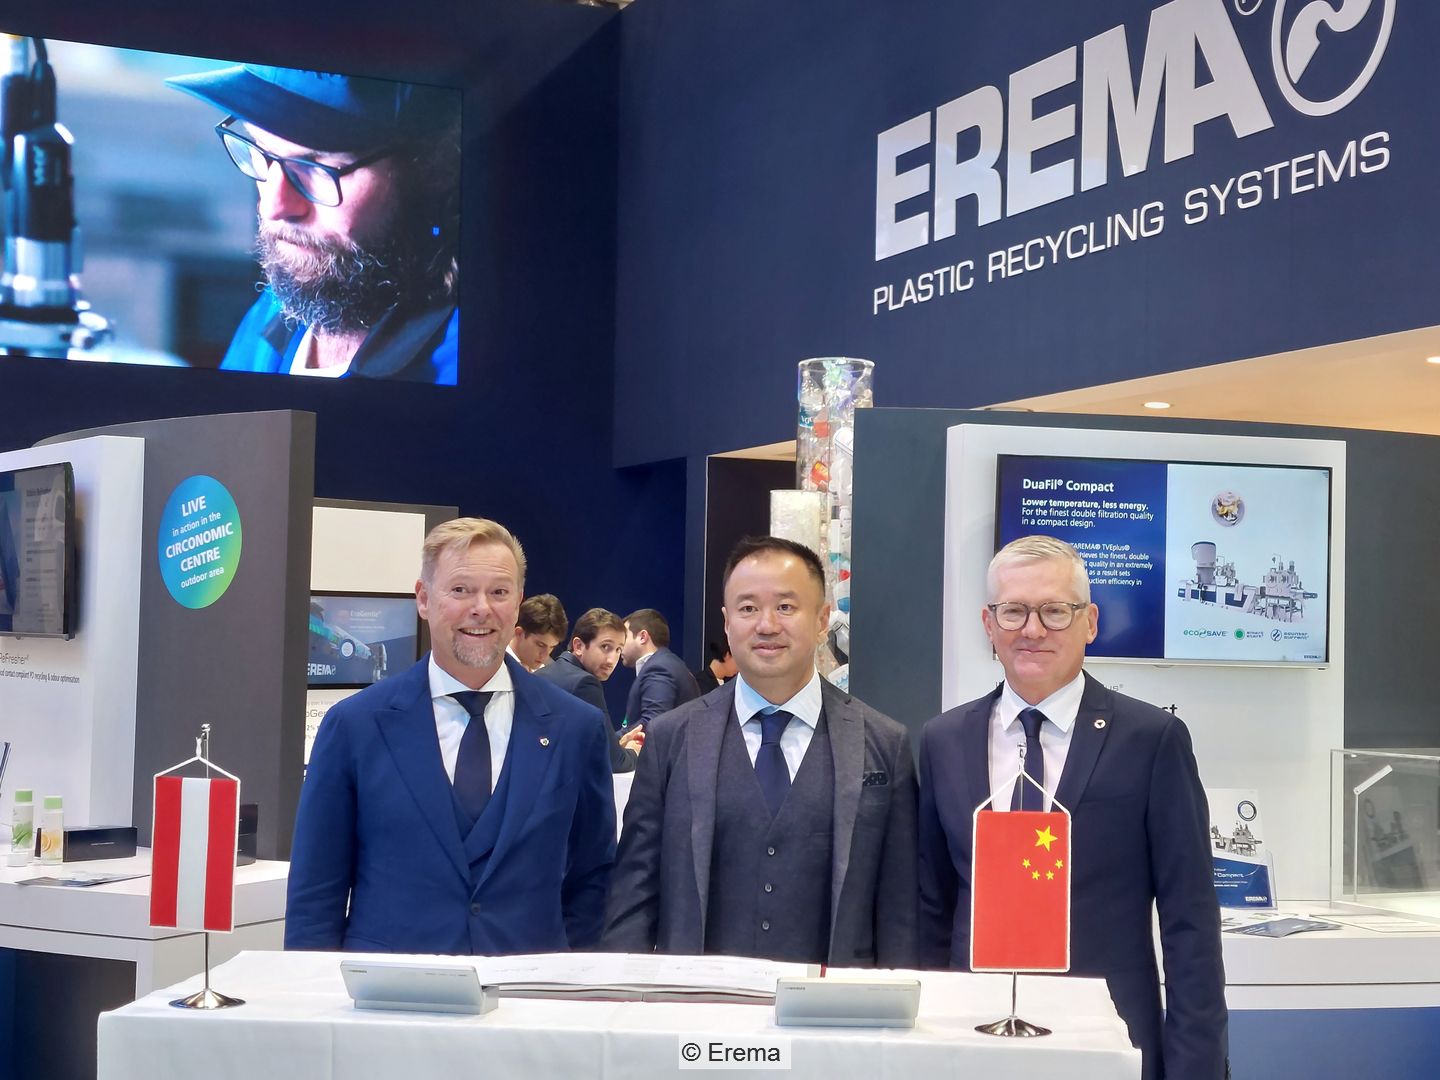 From left to right: Michael Heitzinger (managing director Erema), Frank Liu (CEO Intco) and Manfred Hackl (CEO Erema)